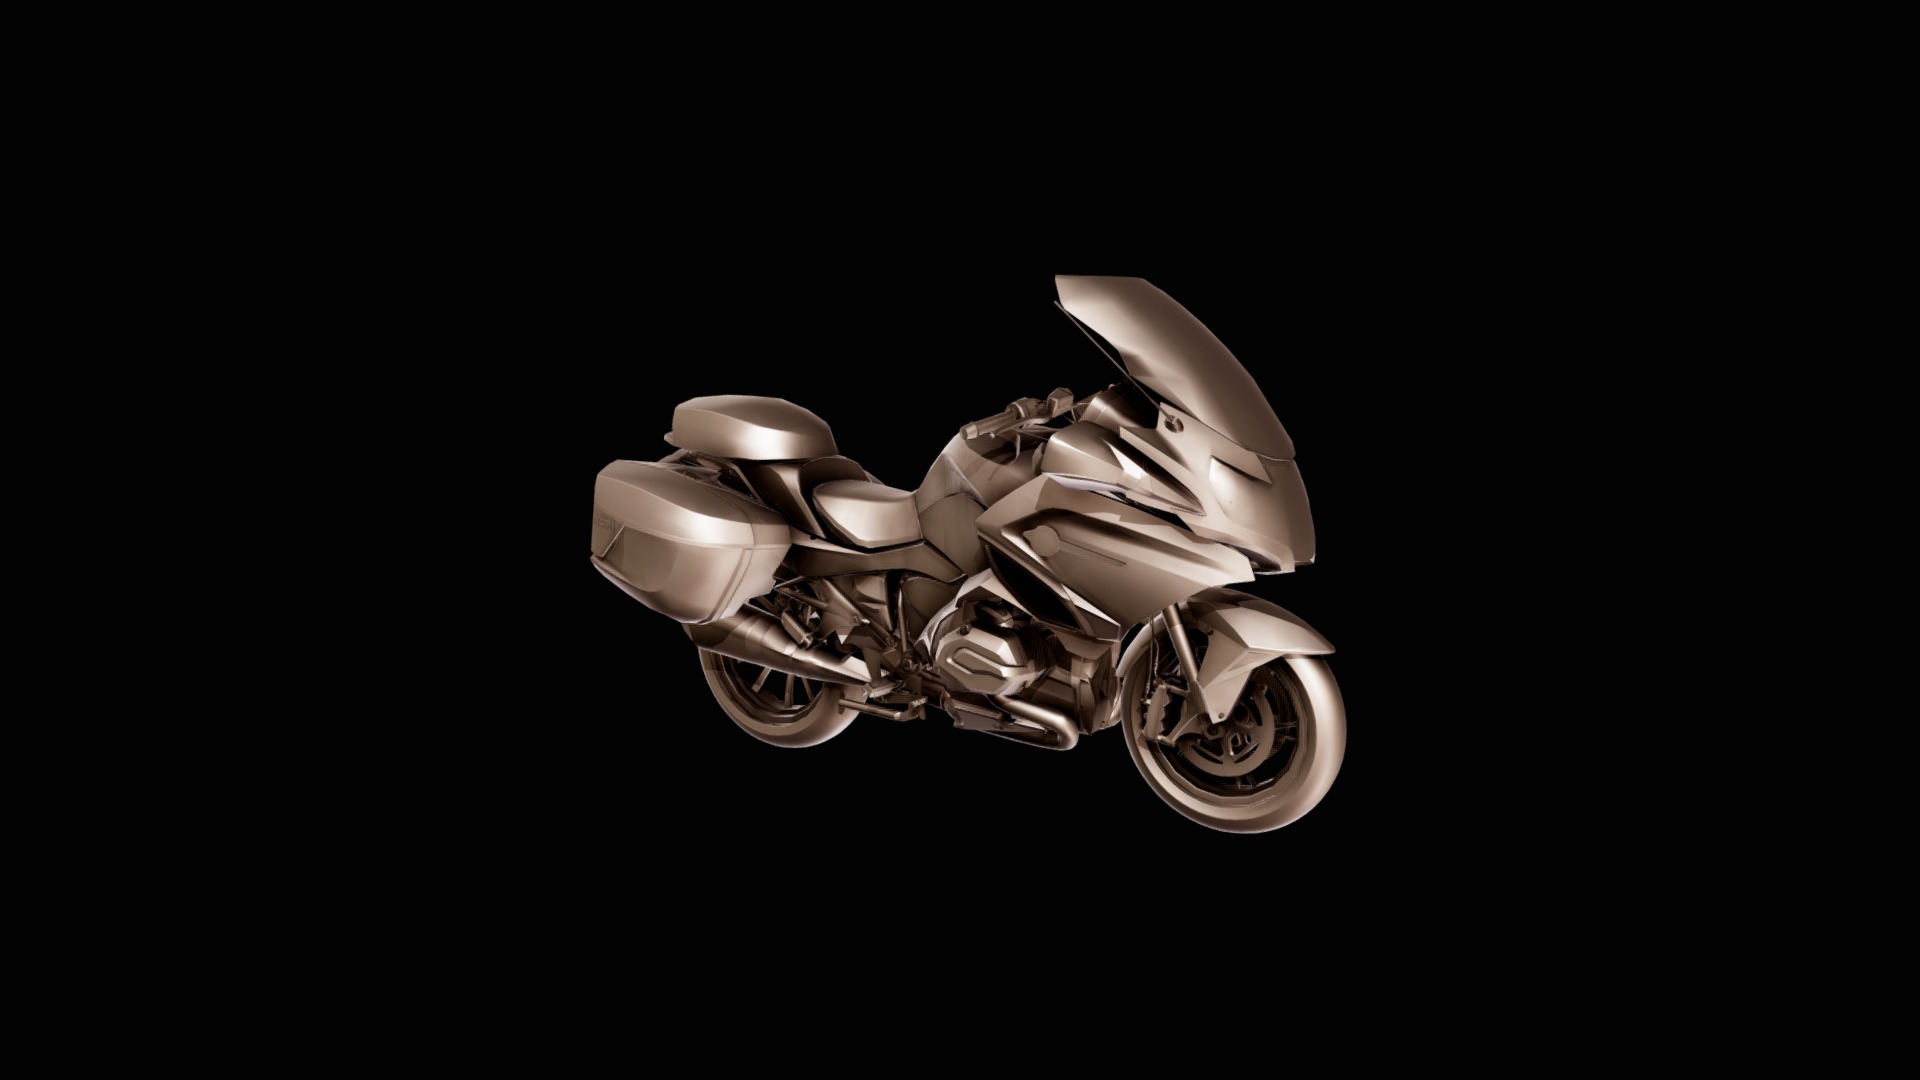 3D model BMW 1200 RT V1 - This is a 3D model of the BMW 1200 RT V1. The 3D model is about a motorcycle with a black background.